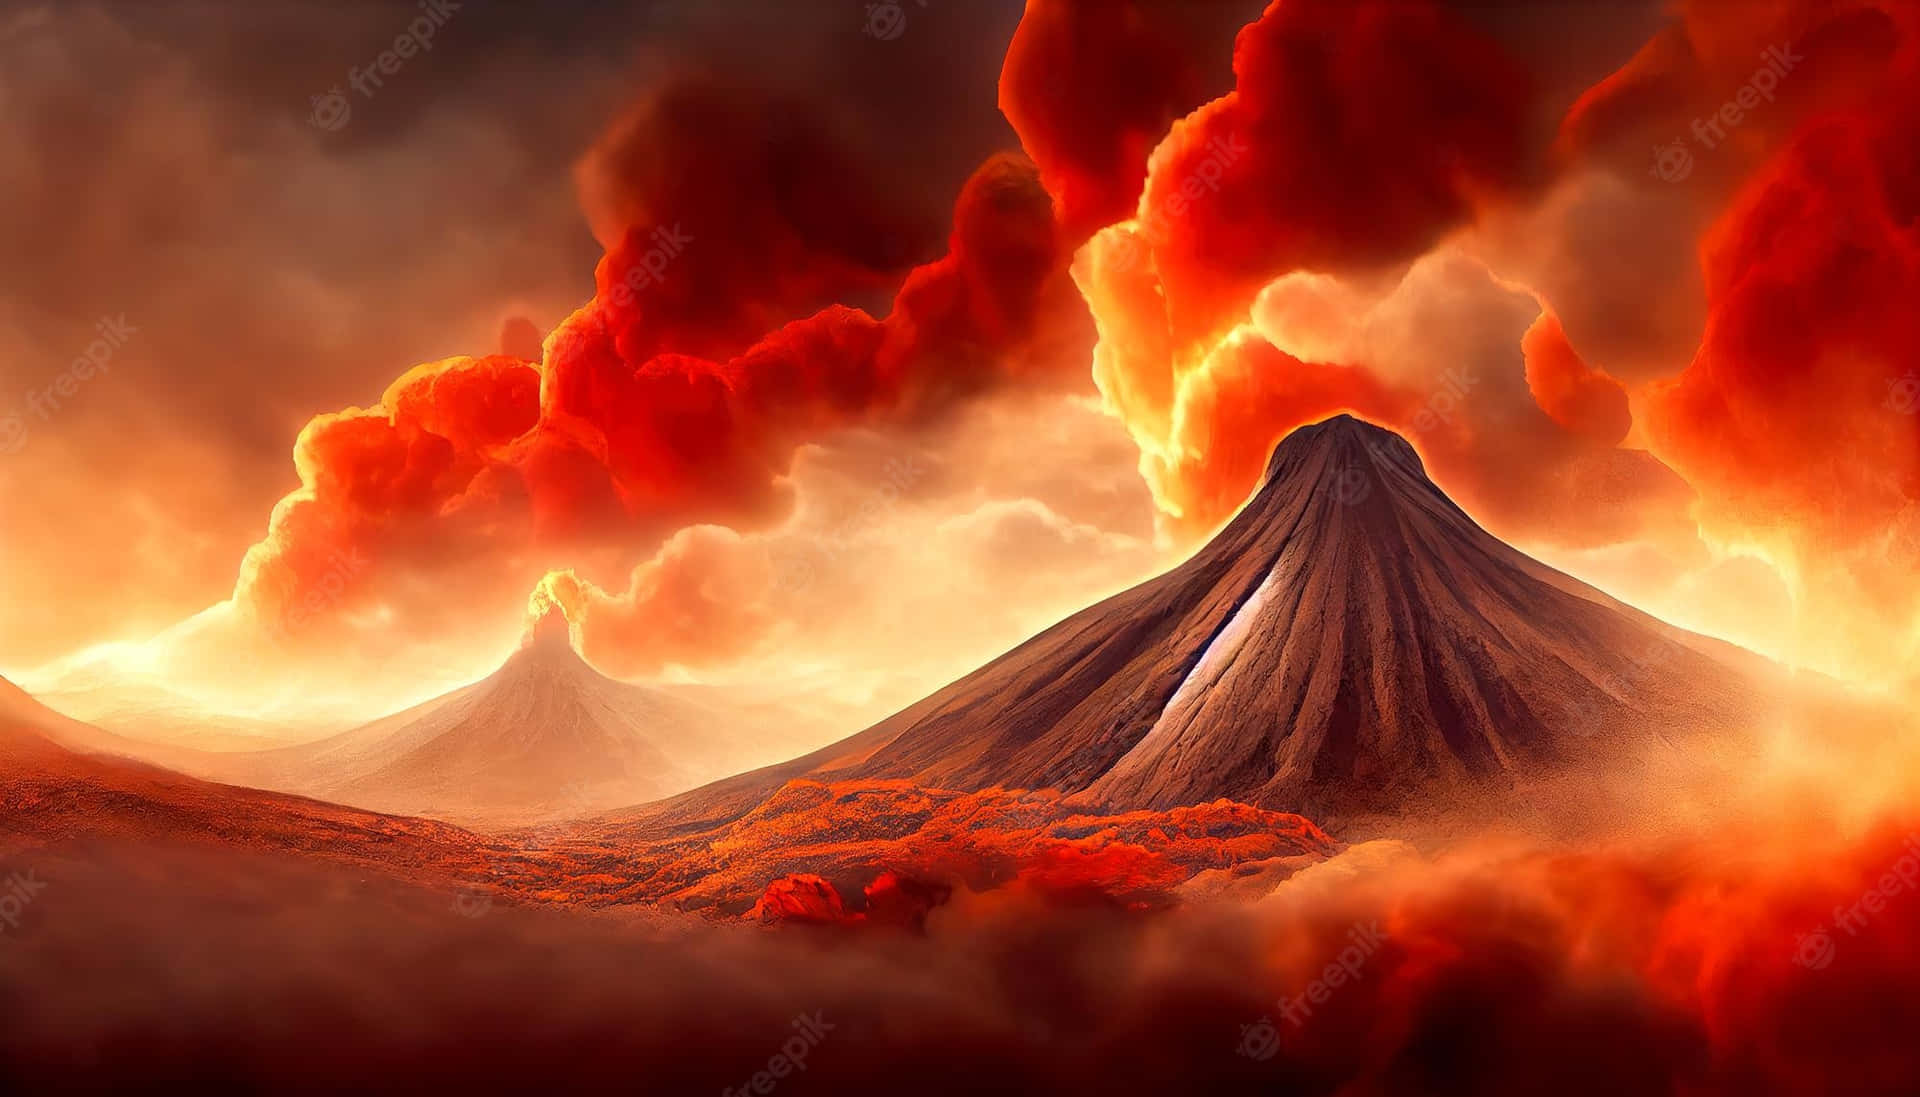 3002935 1920x1080 Crystal Eruption Lava Mining Mountain Steampunk  Vehicle Volcano  Rare Gallery HD Wallpapers